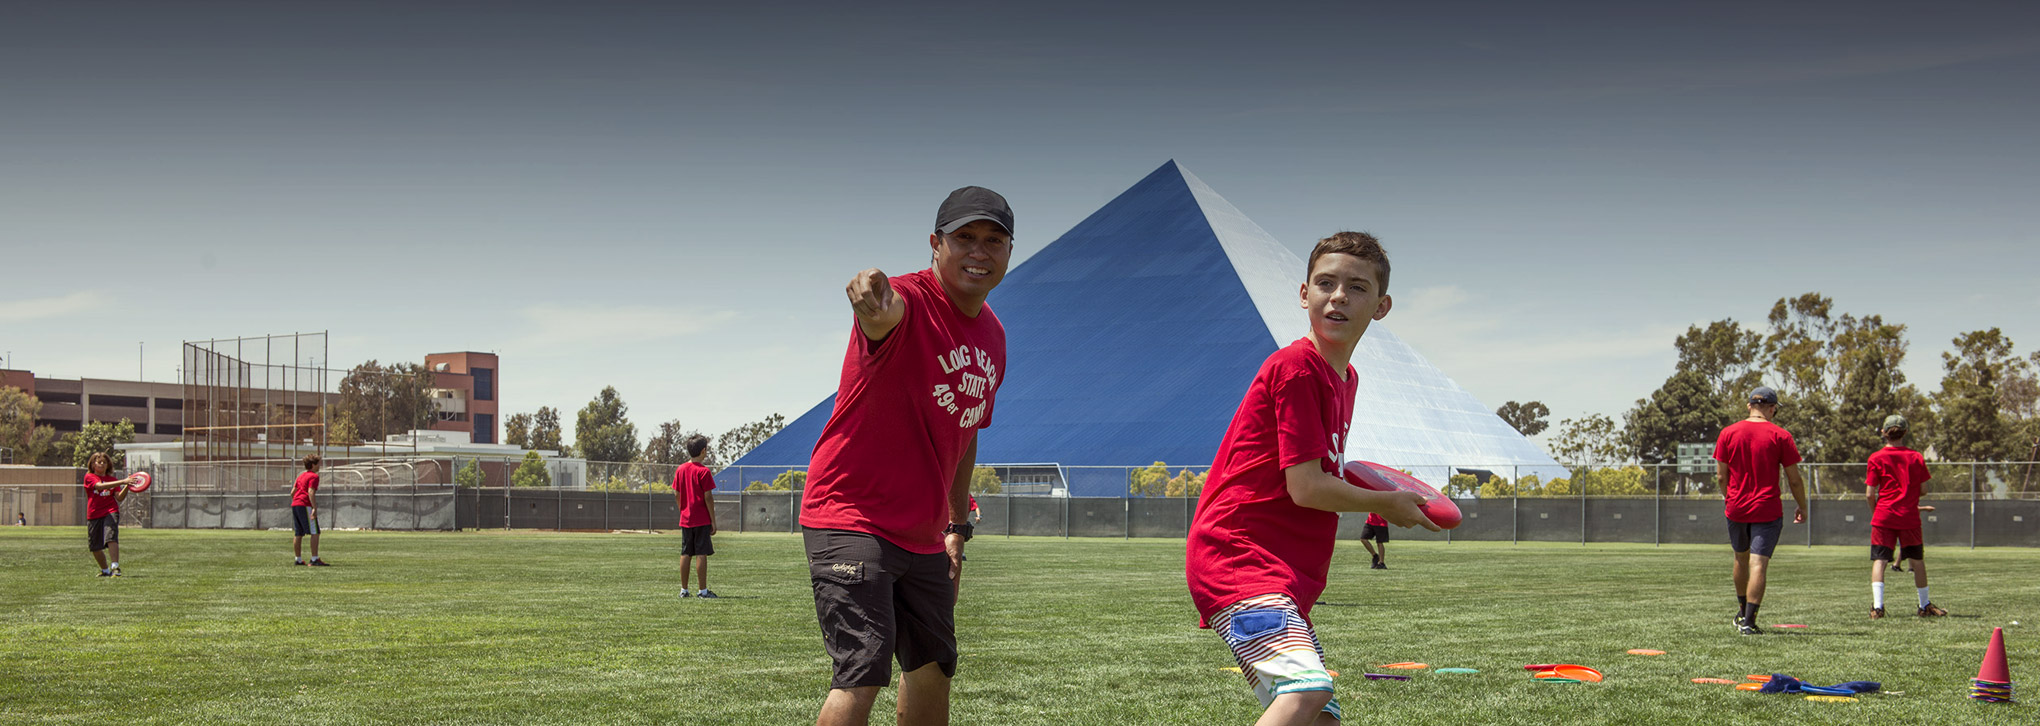 Page banner: young students playing ball on campus field, pyramid is seen in the background.